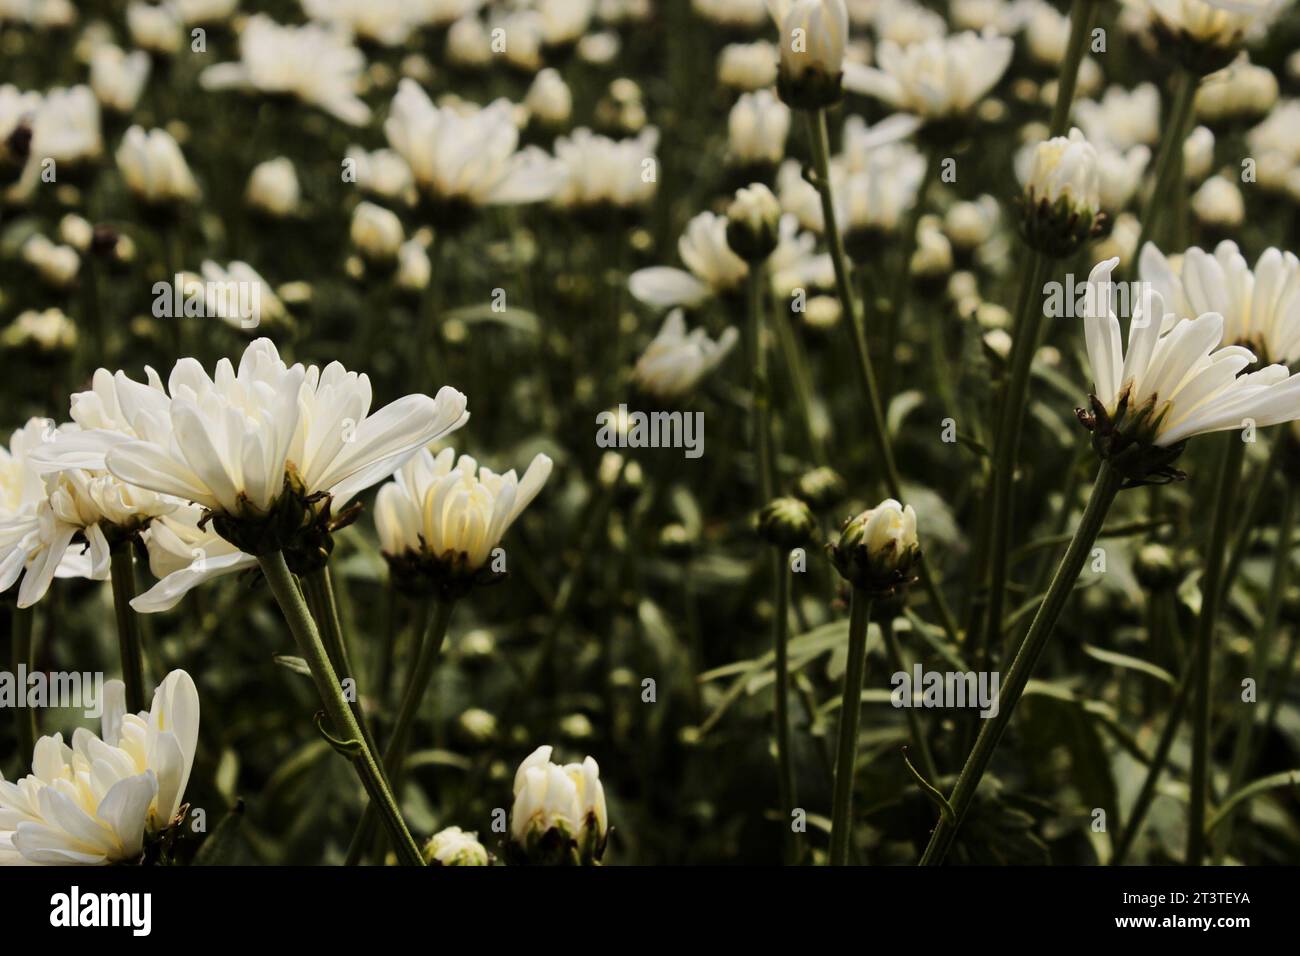 White Chrysanthemum Flowers, a plant from the Asteraceae family, cultivated in a cut flower production system by producers in the city of Holambra, kn Stock Photo